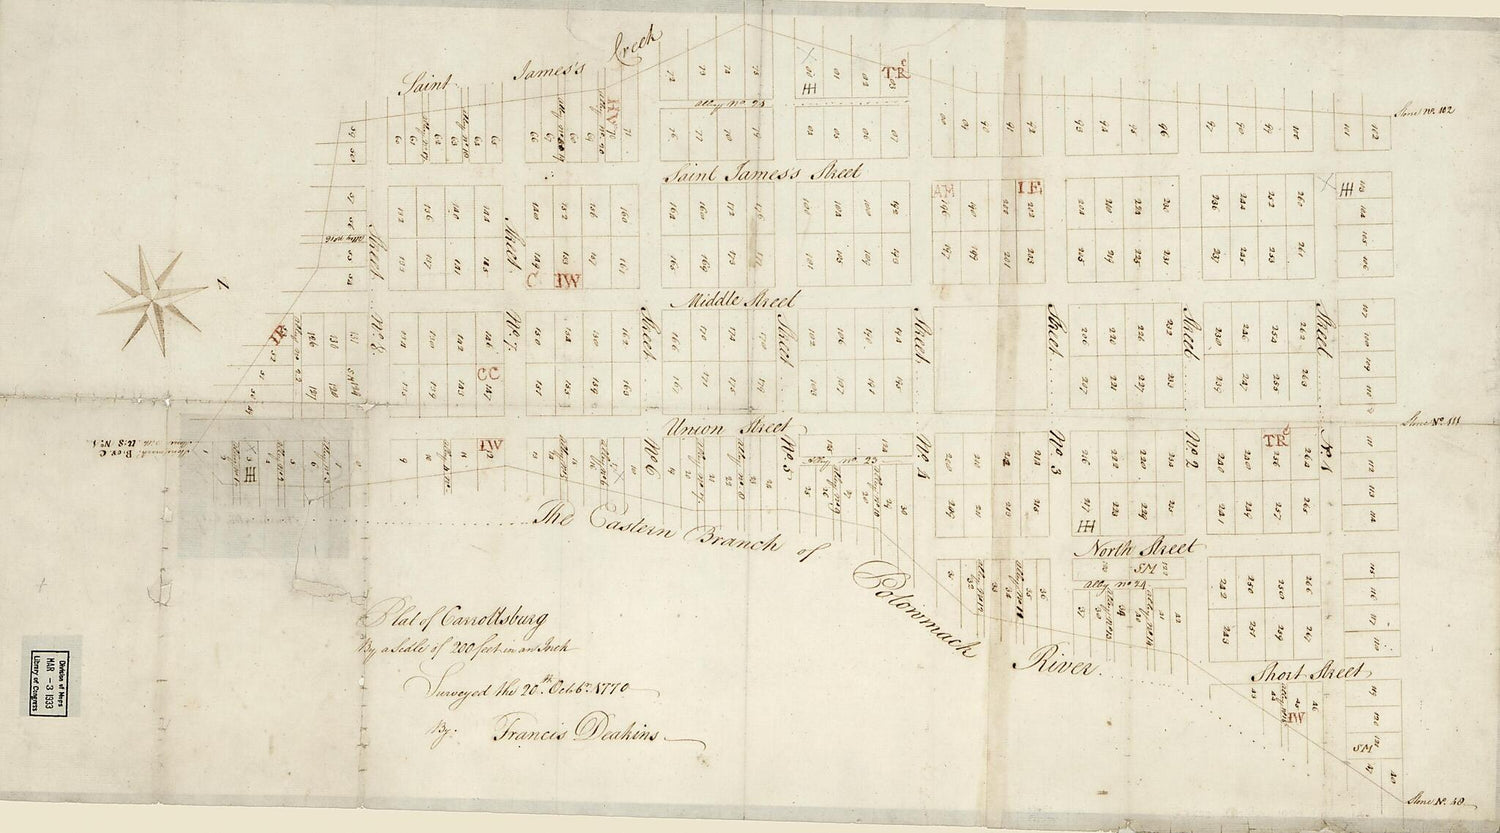 This old map of Plat of Carrollsburg from 1770 was created by Francis Deakins in 1770